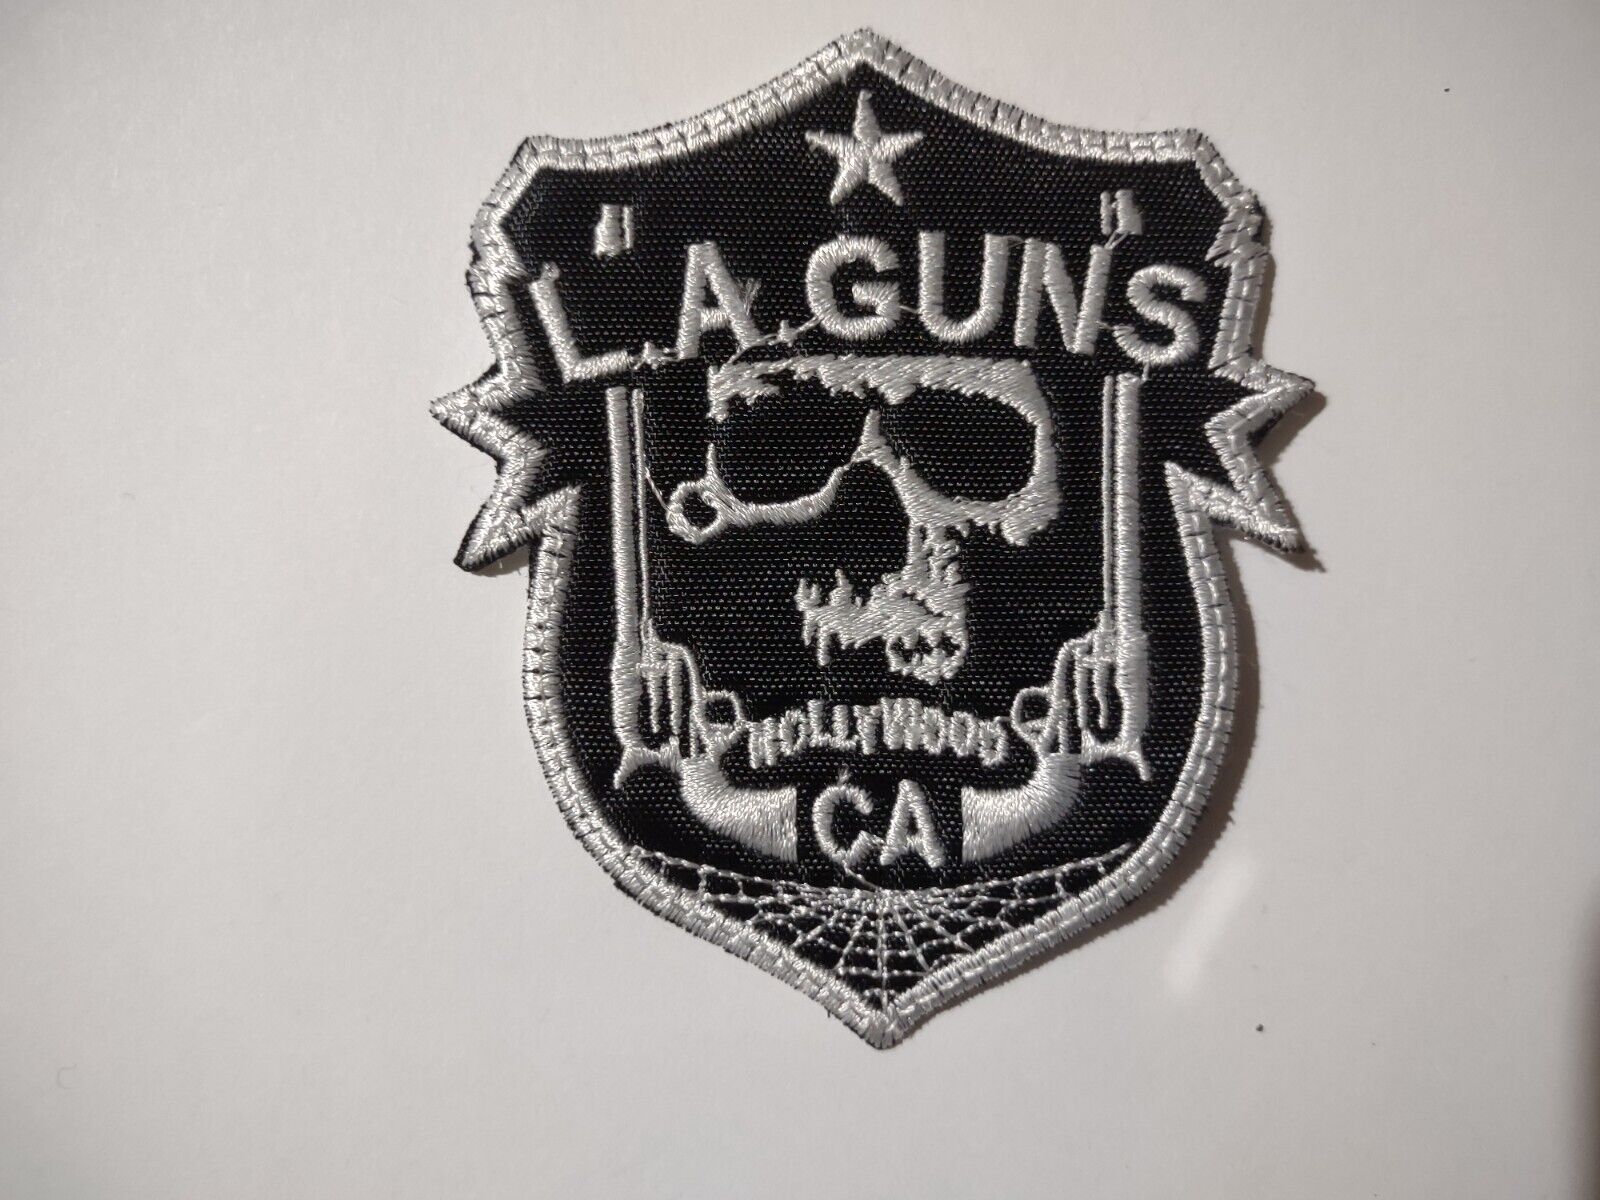 LA GUNS SHIELD, SEW ON WHITE WITH WHITE BORDER EMBROIDERED PATCH